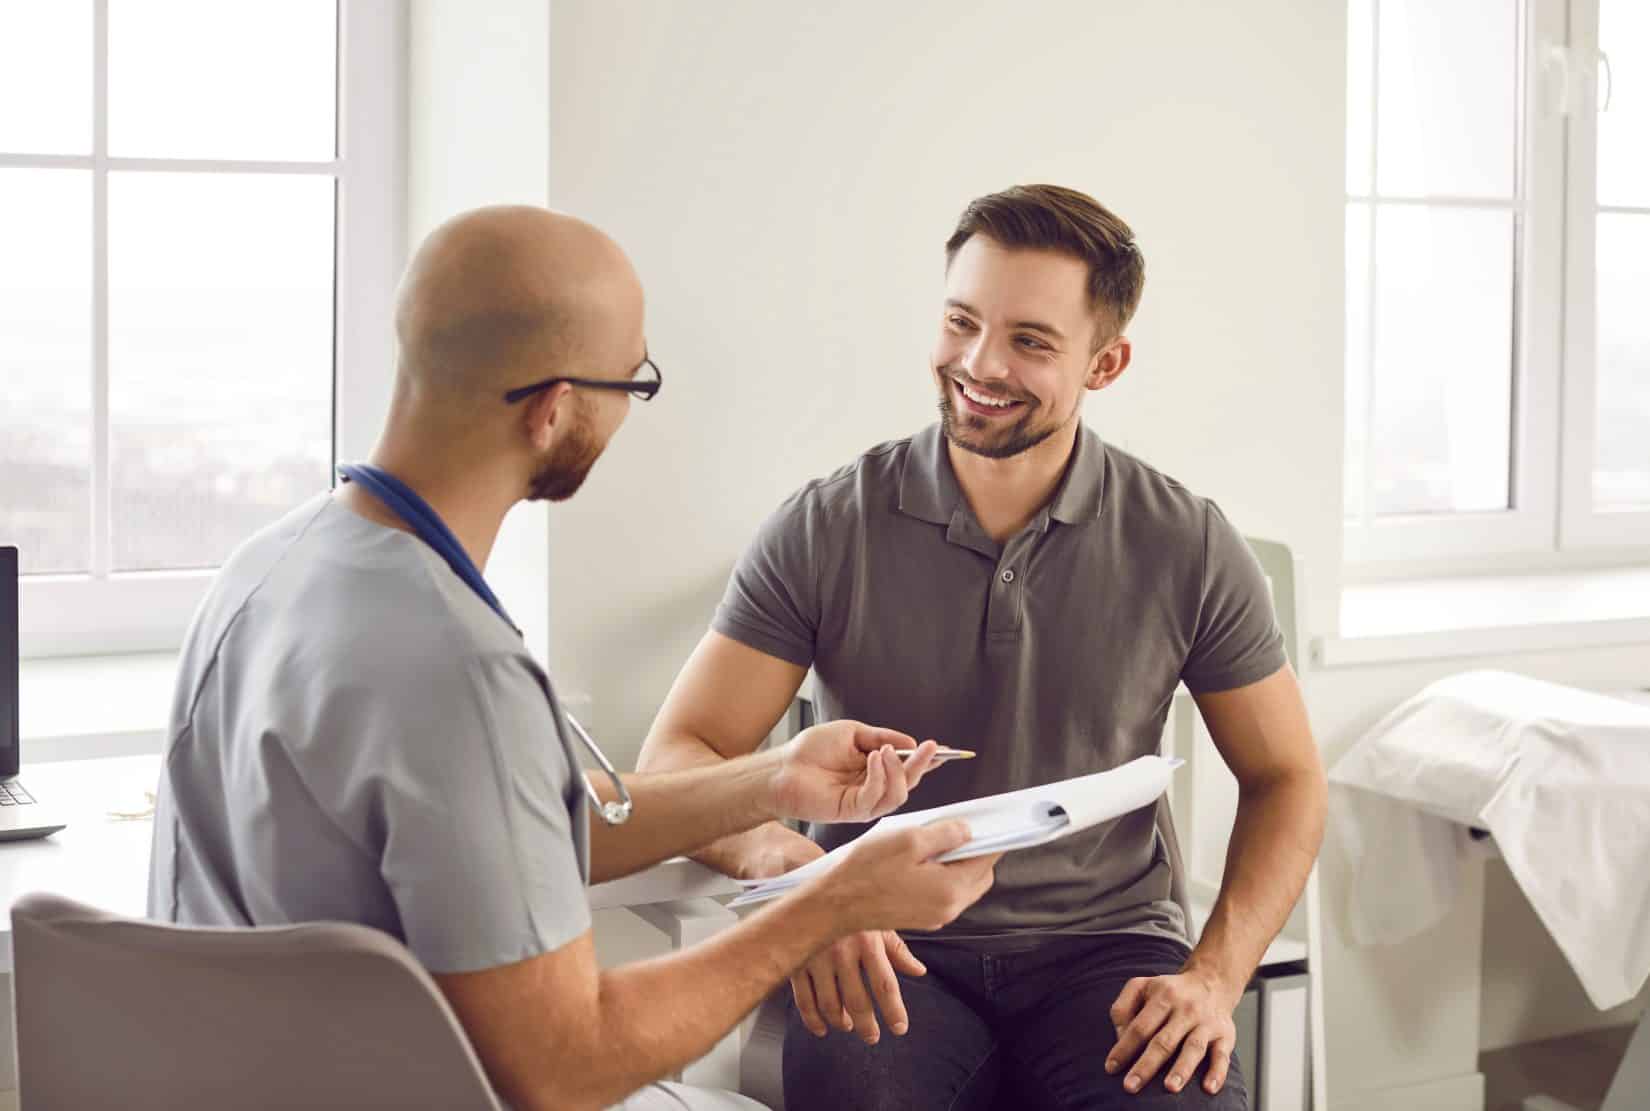 A healthcare professional in scrubs consults with a smiling patient in a clinic.